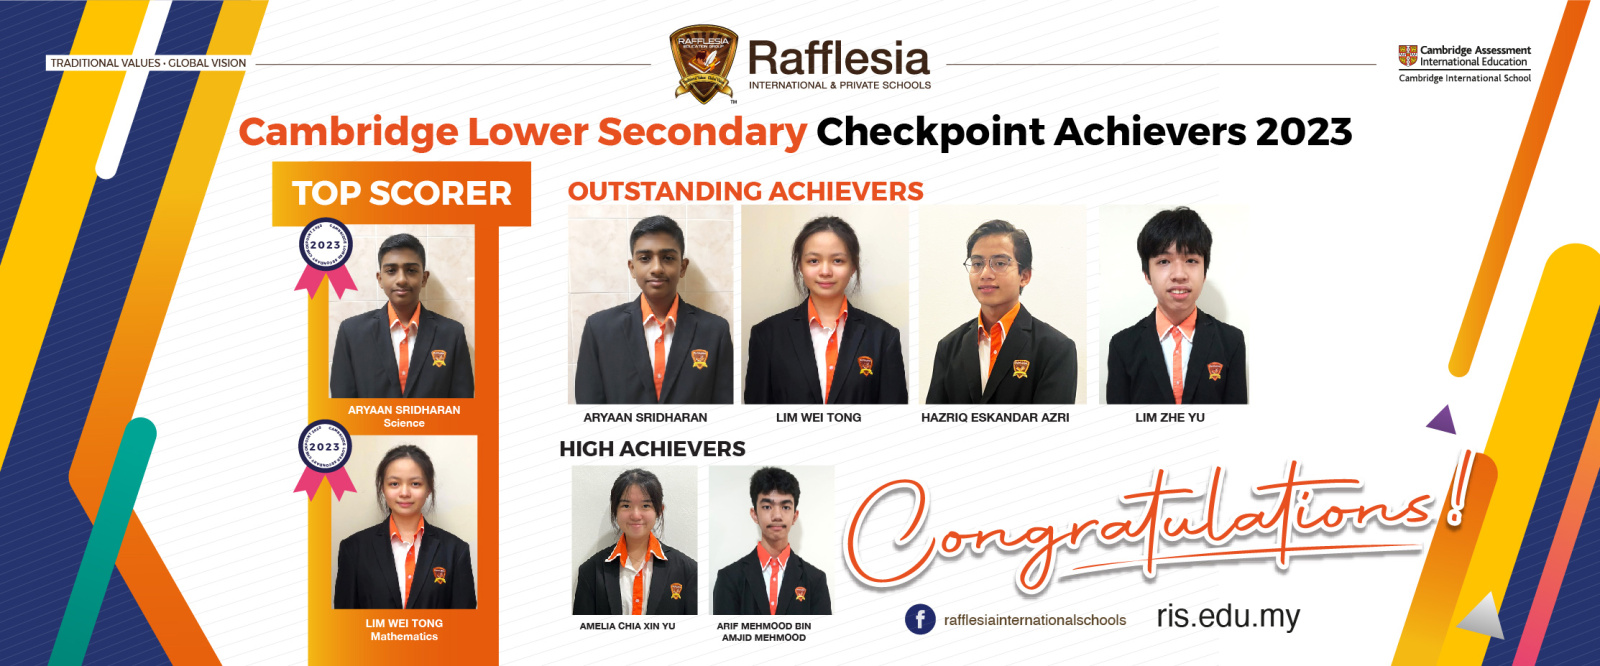 Cambridge Lower Secondary Checkpoint Achievers 2023